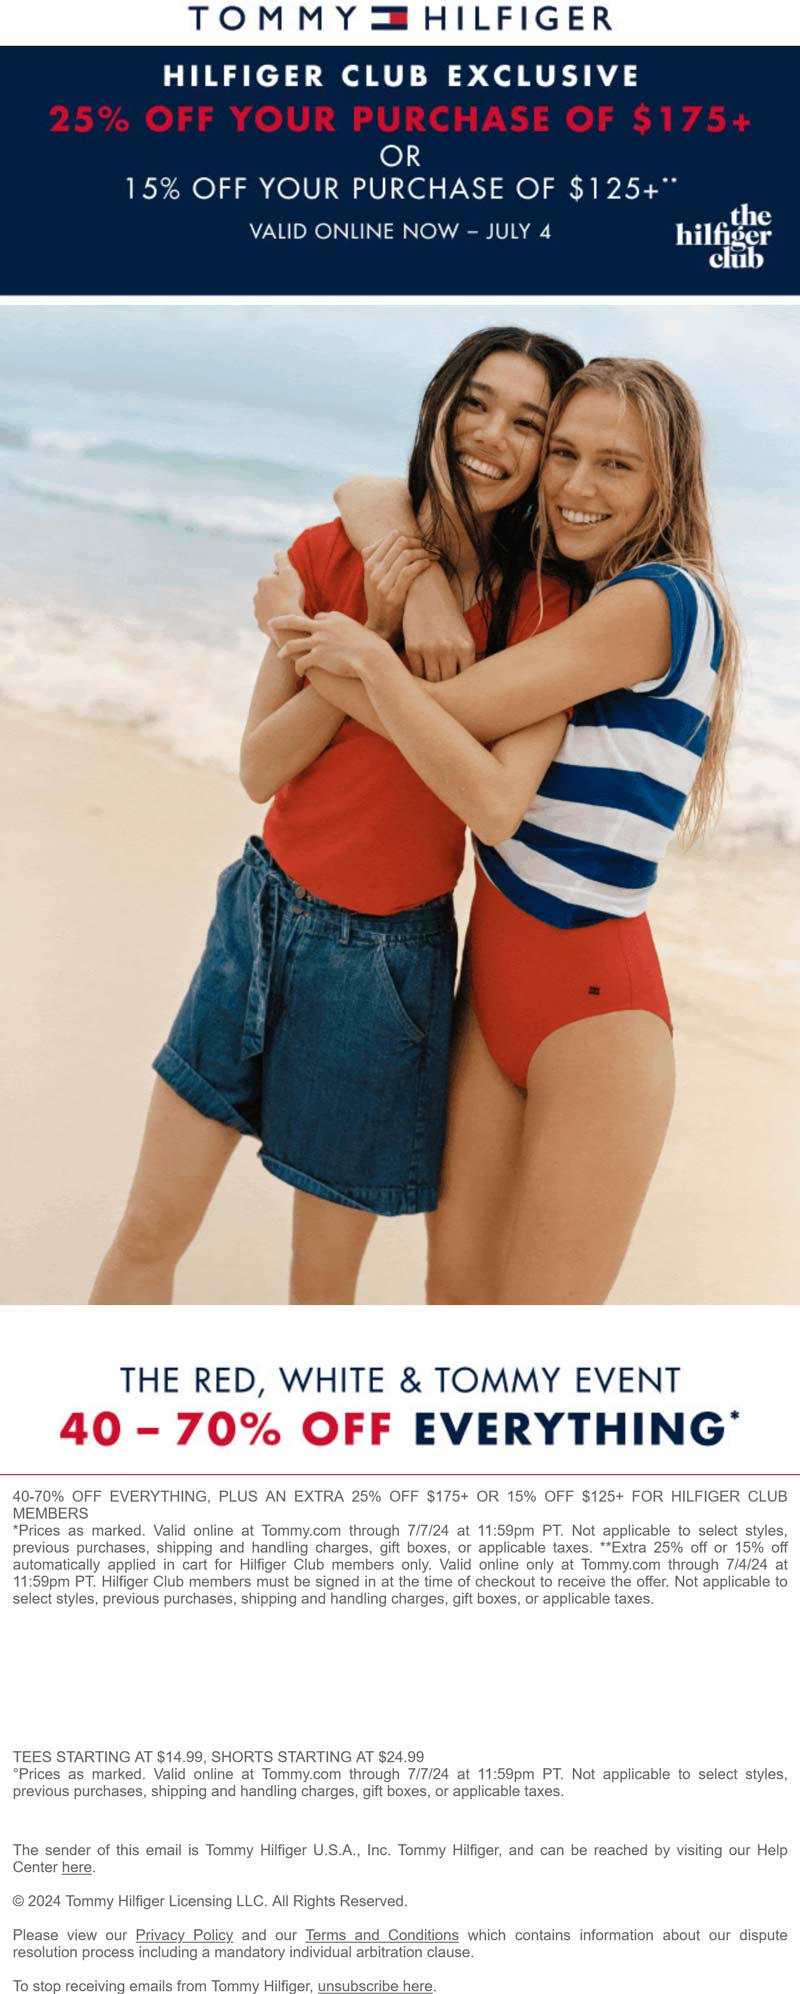 Tommy Hilfiger stores Coupon  40-70% off everything + another 25% off $175 online at Tommy Hilfiger #tommyhilfiger 